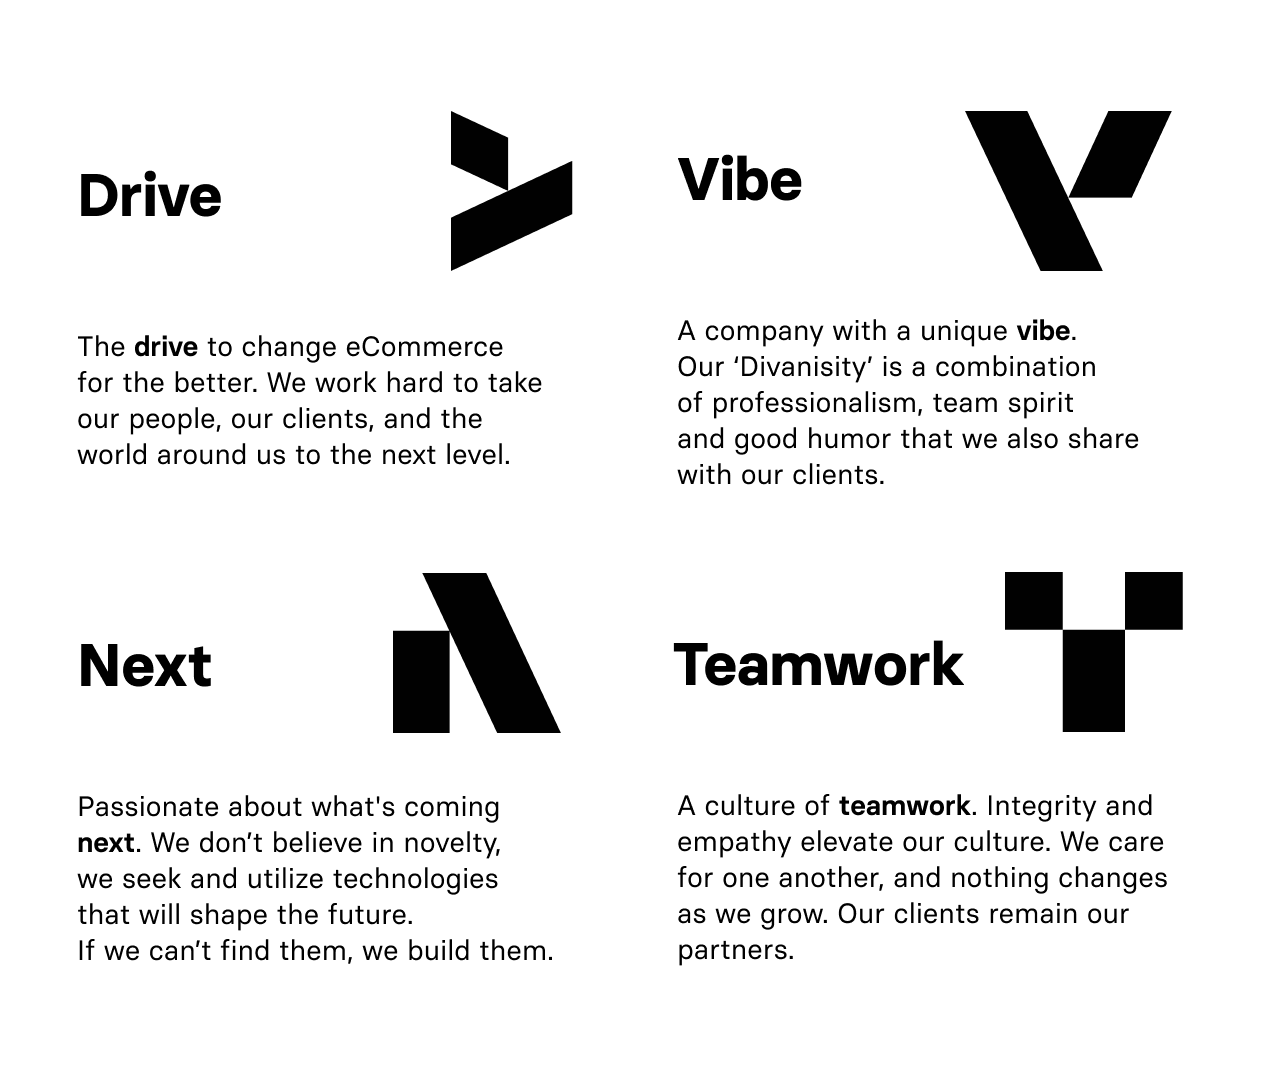 Our DVNT company values